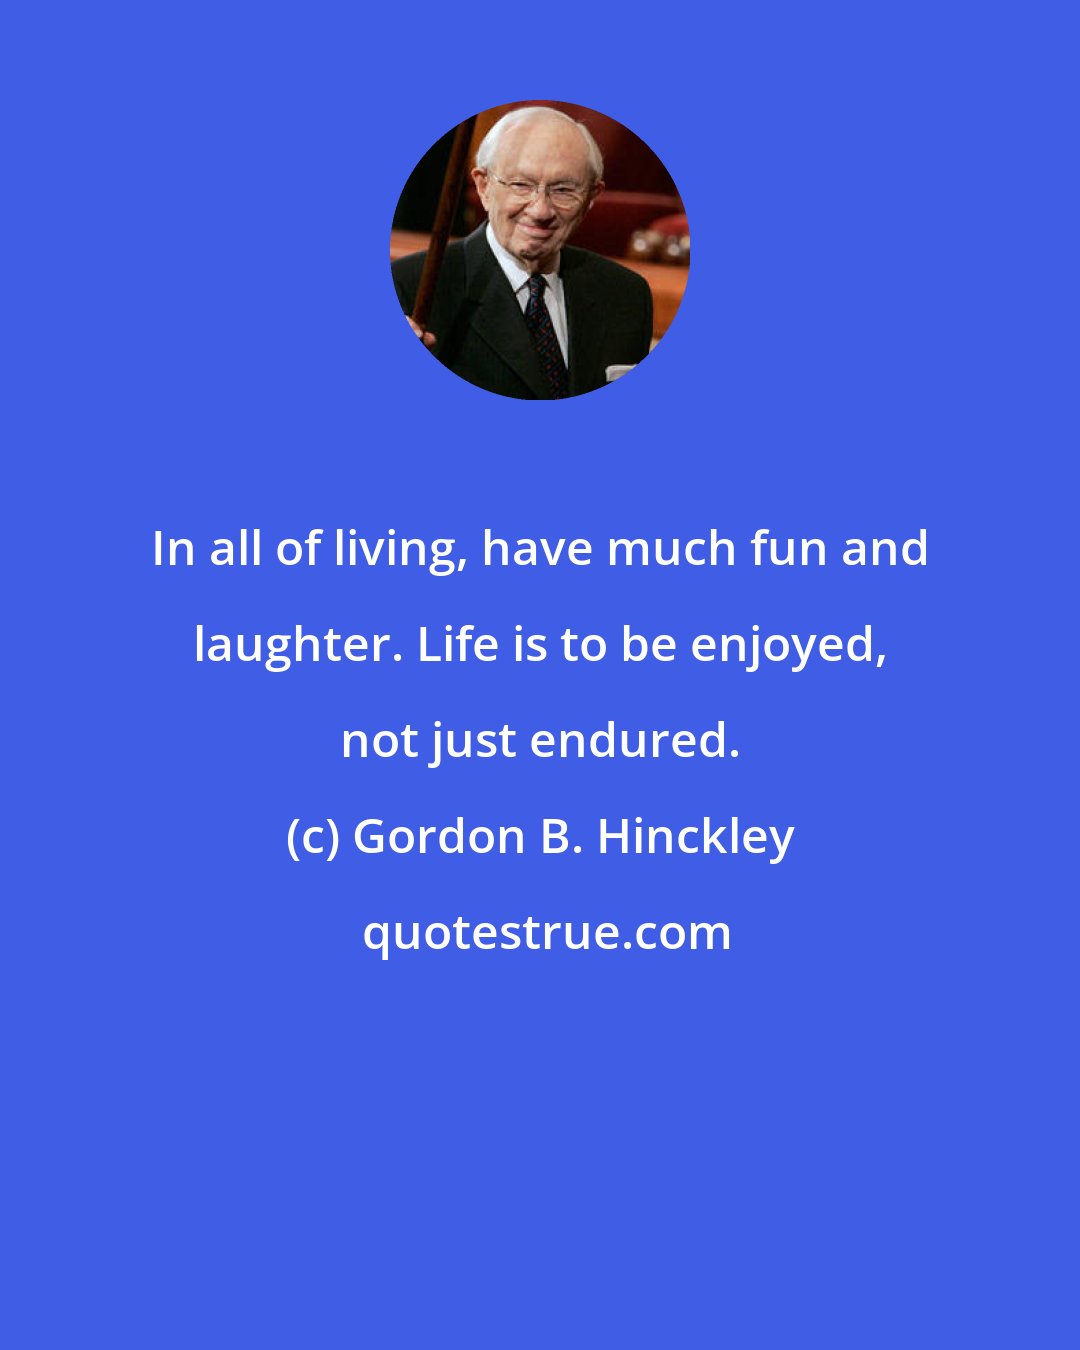 Gordon B. Hinckley: In all of living, have much fun and laughter. Life is to be enjoyed, not just endured.